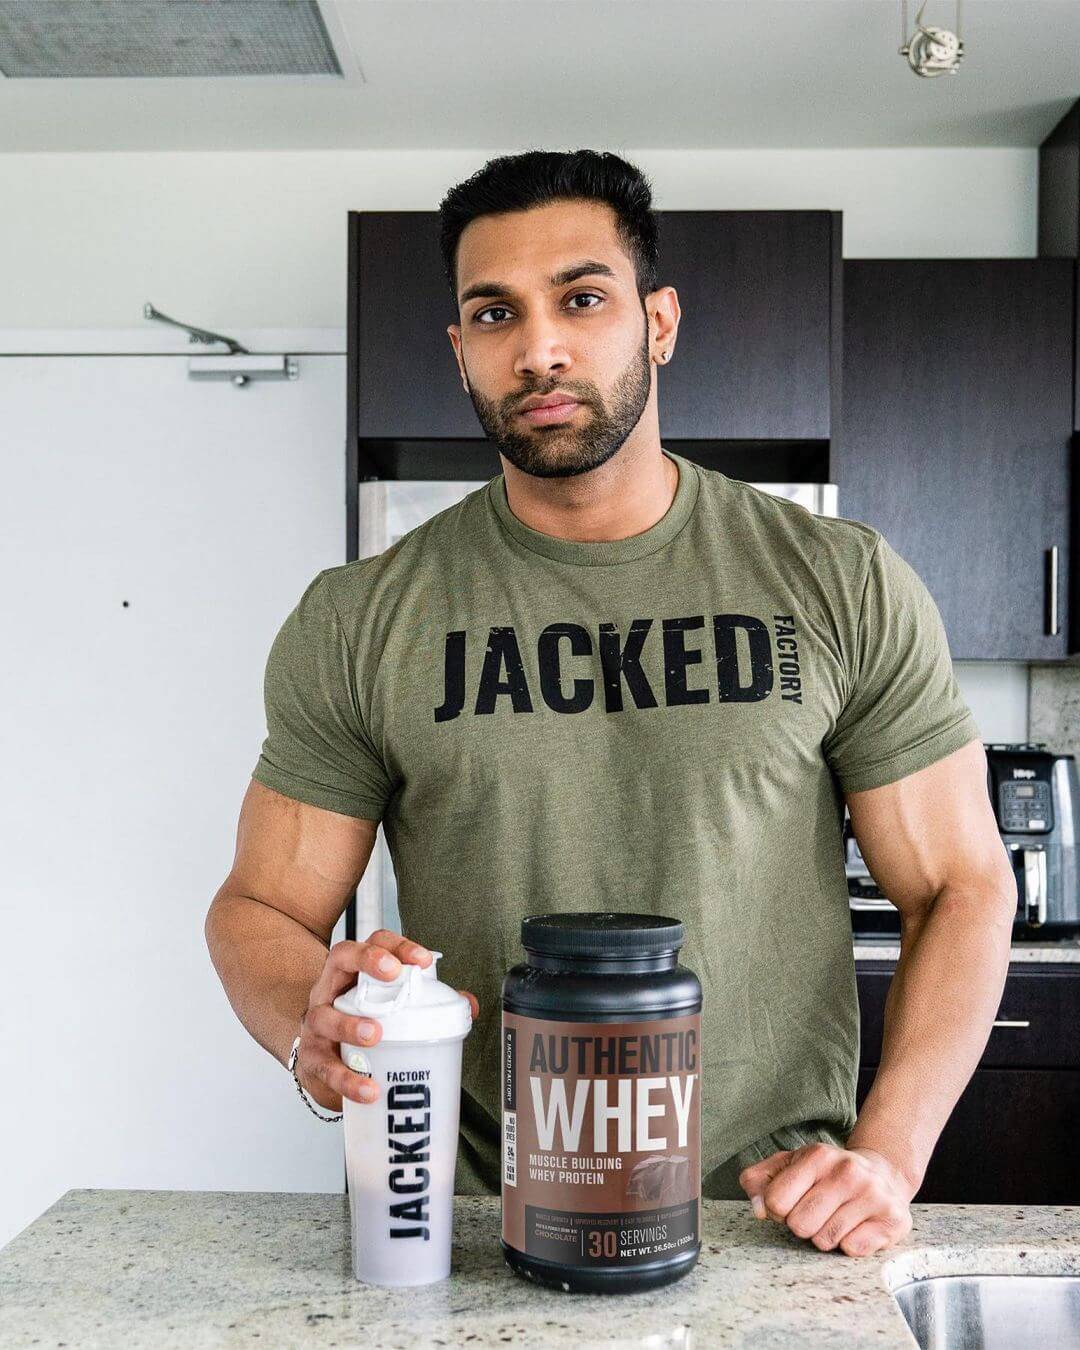 Jacked Factory Authentic Whey instagram